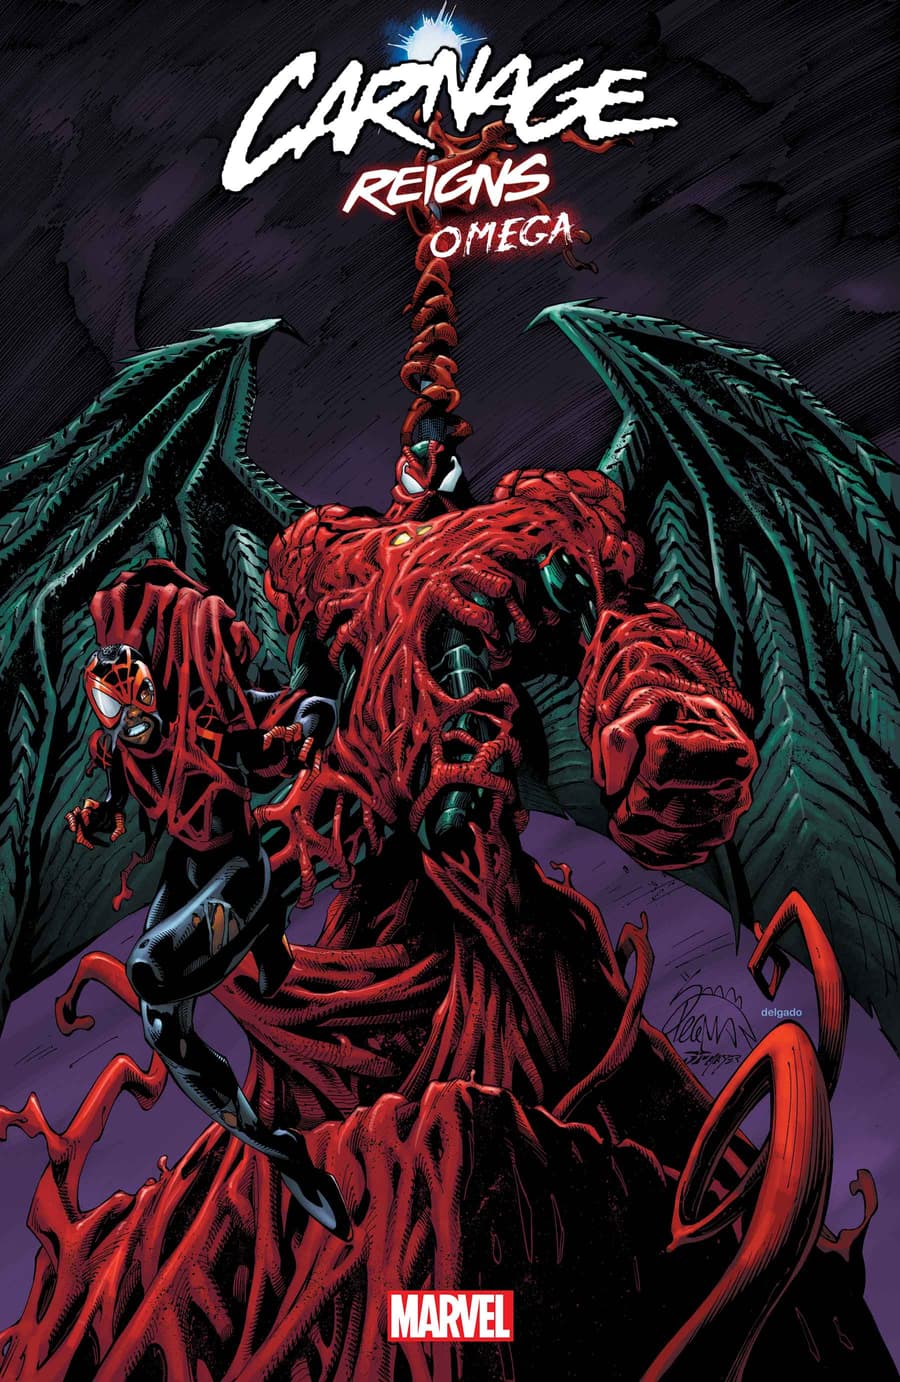 CARNAGE REIGNS OMEGA #1 cover by Ryan Stegman